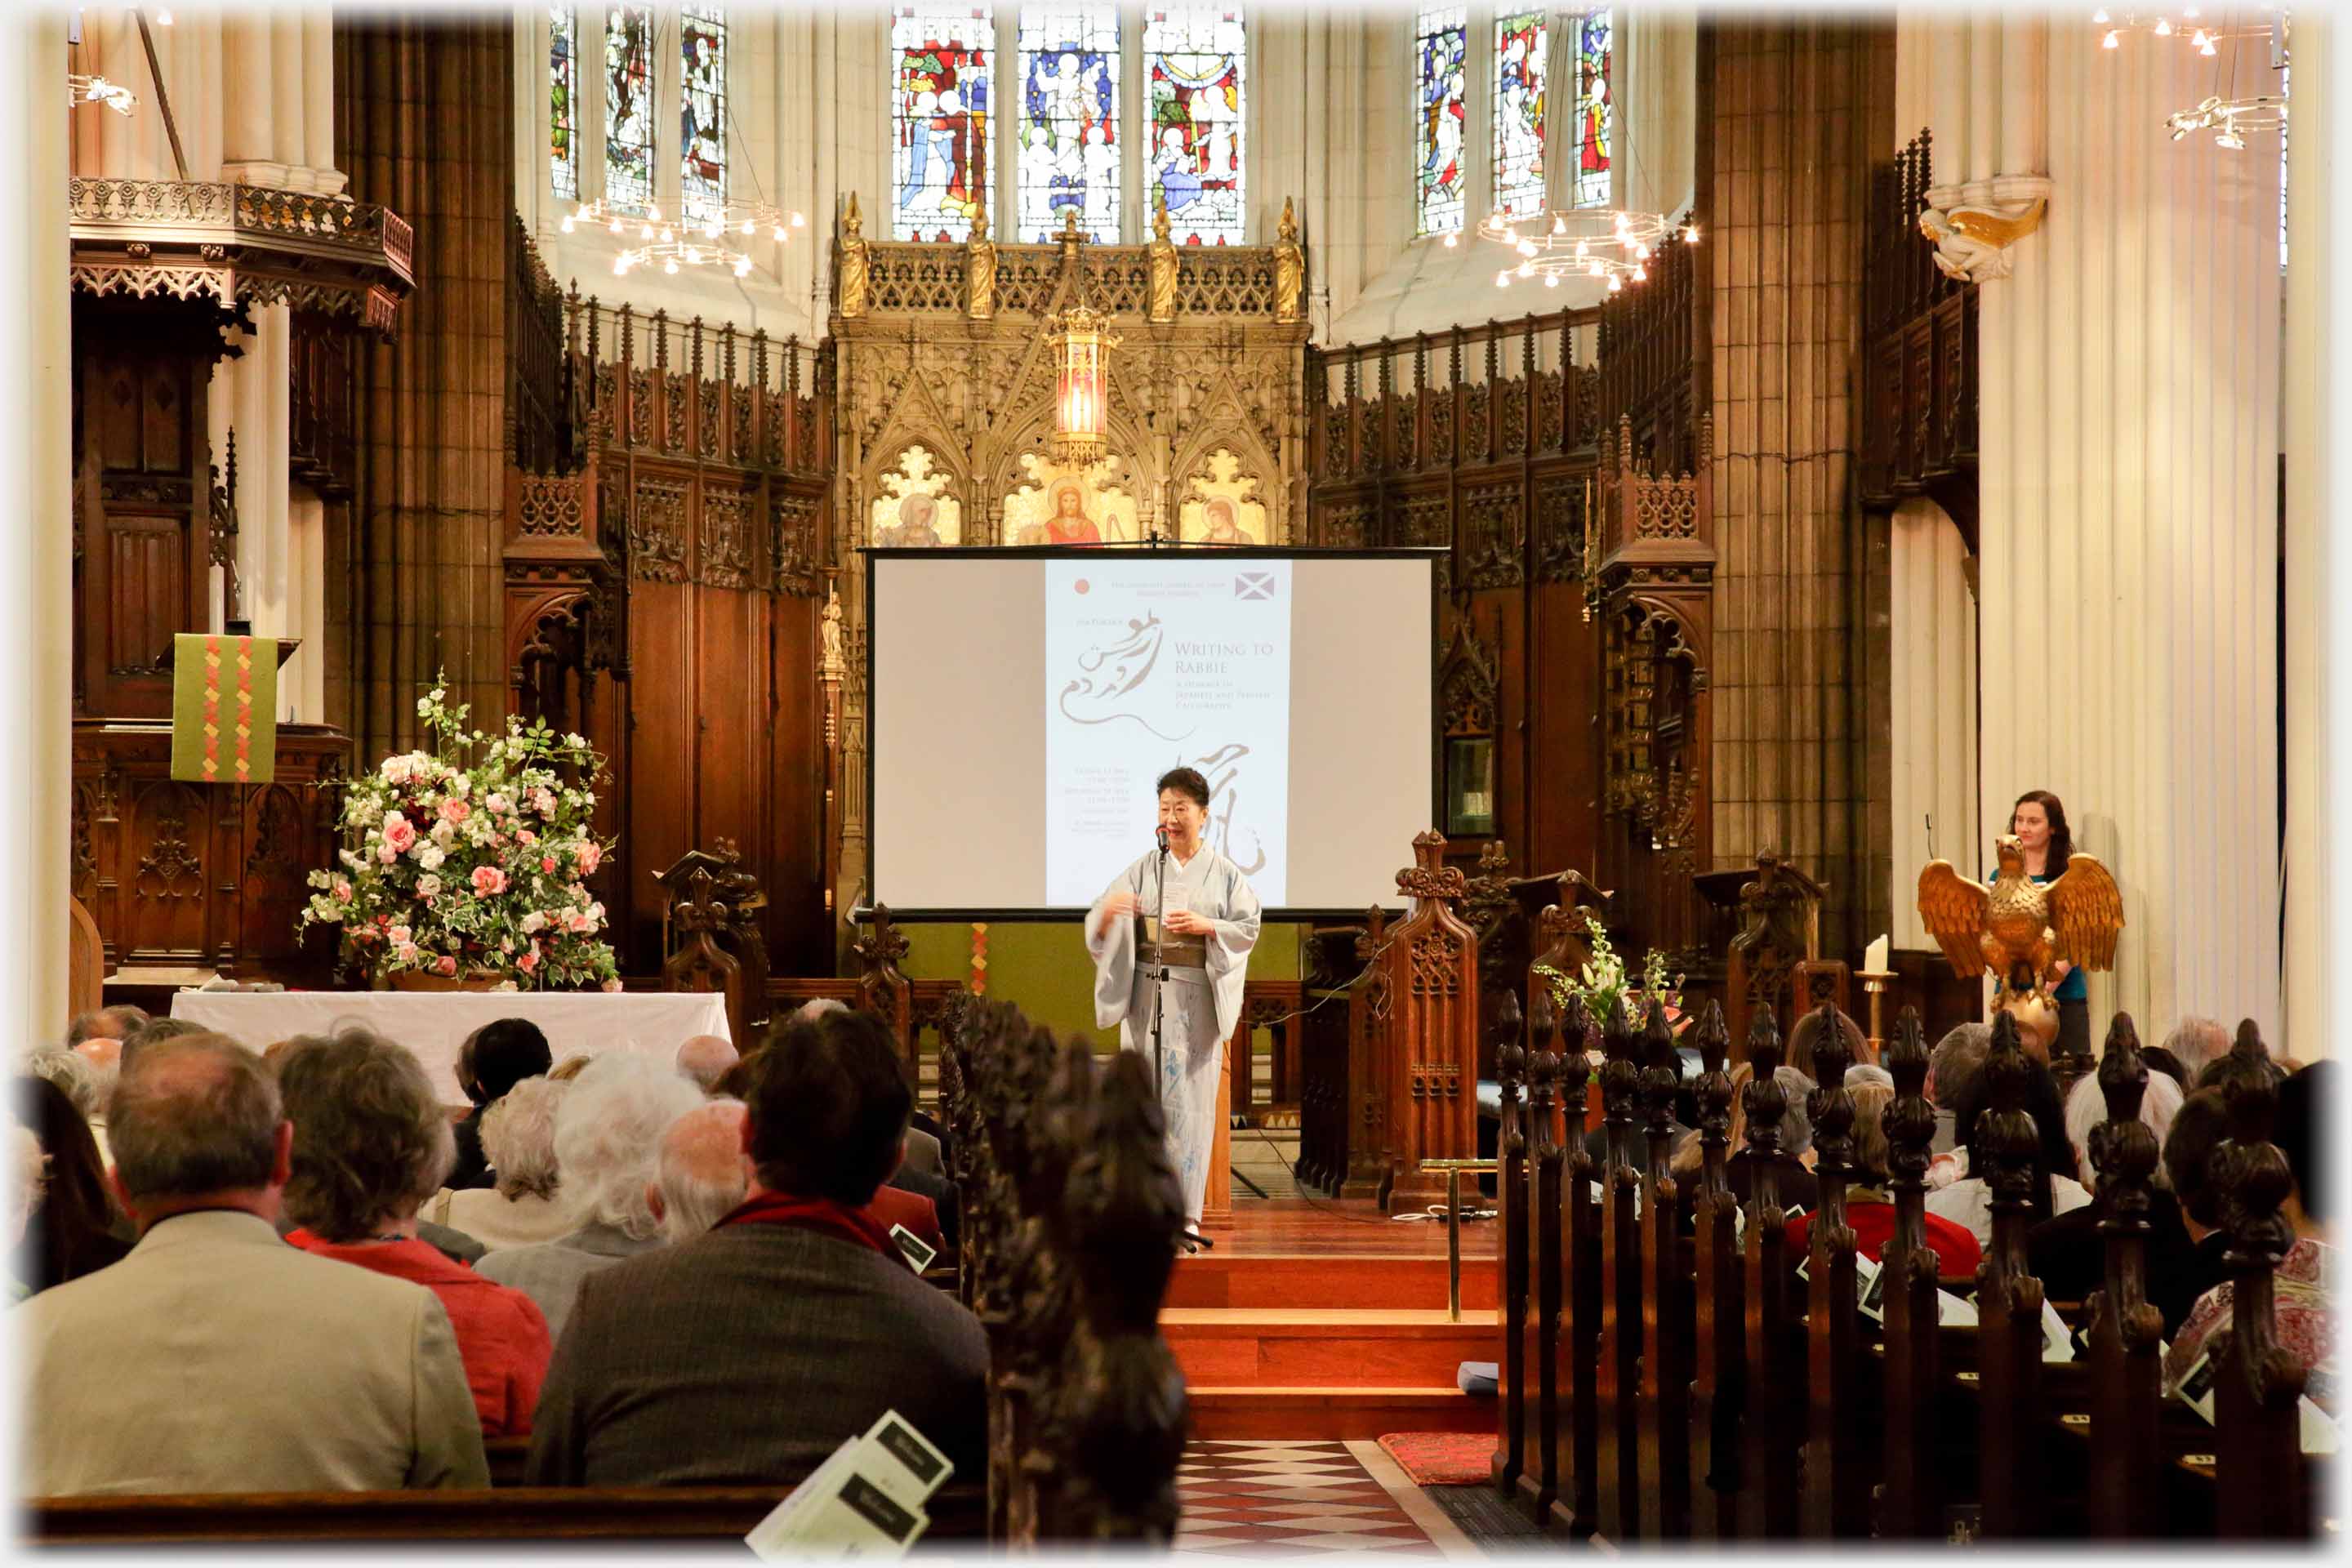 Woman in kimono at microphone in front of audience in church.